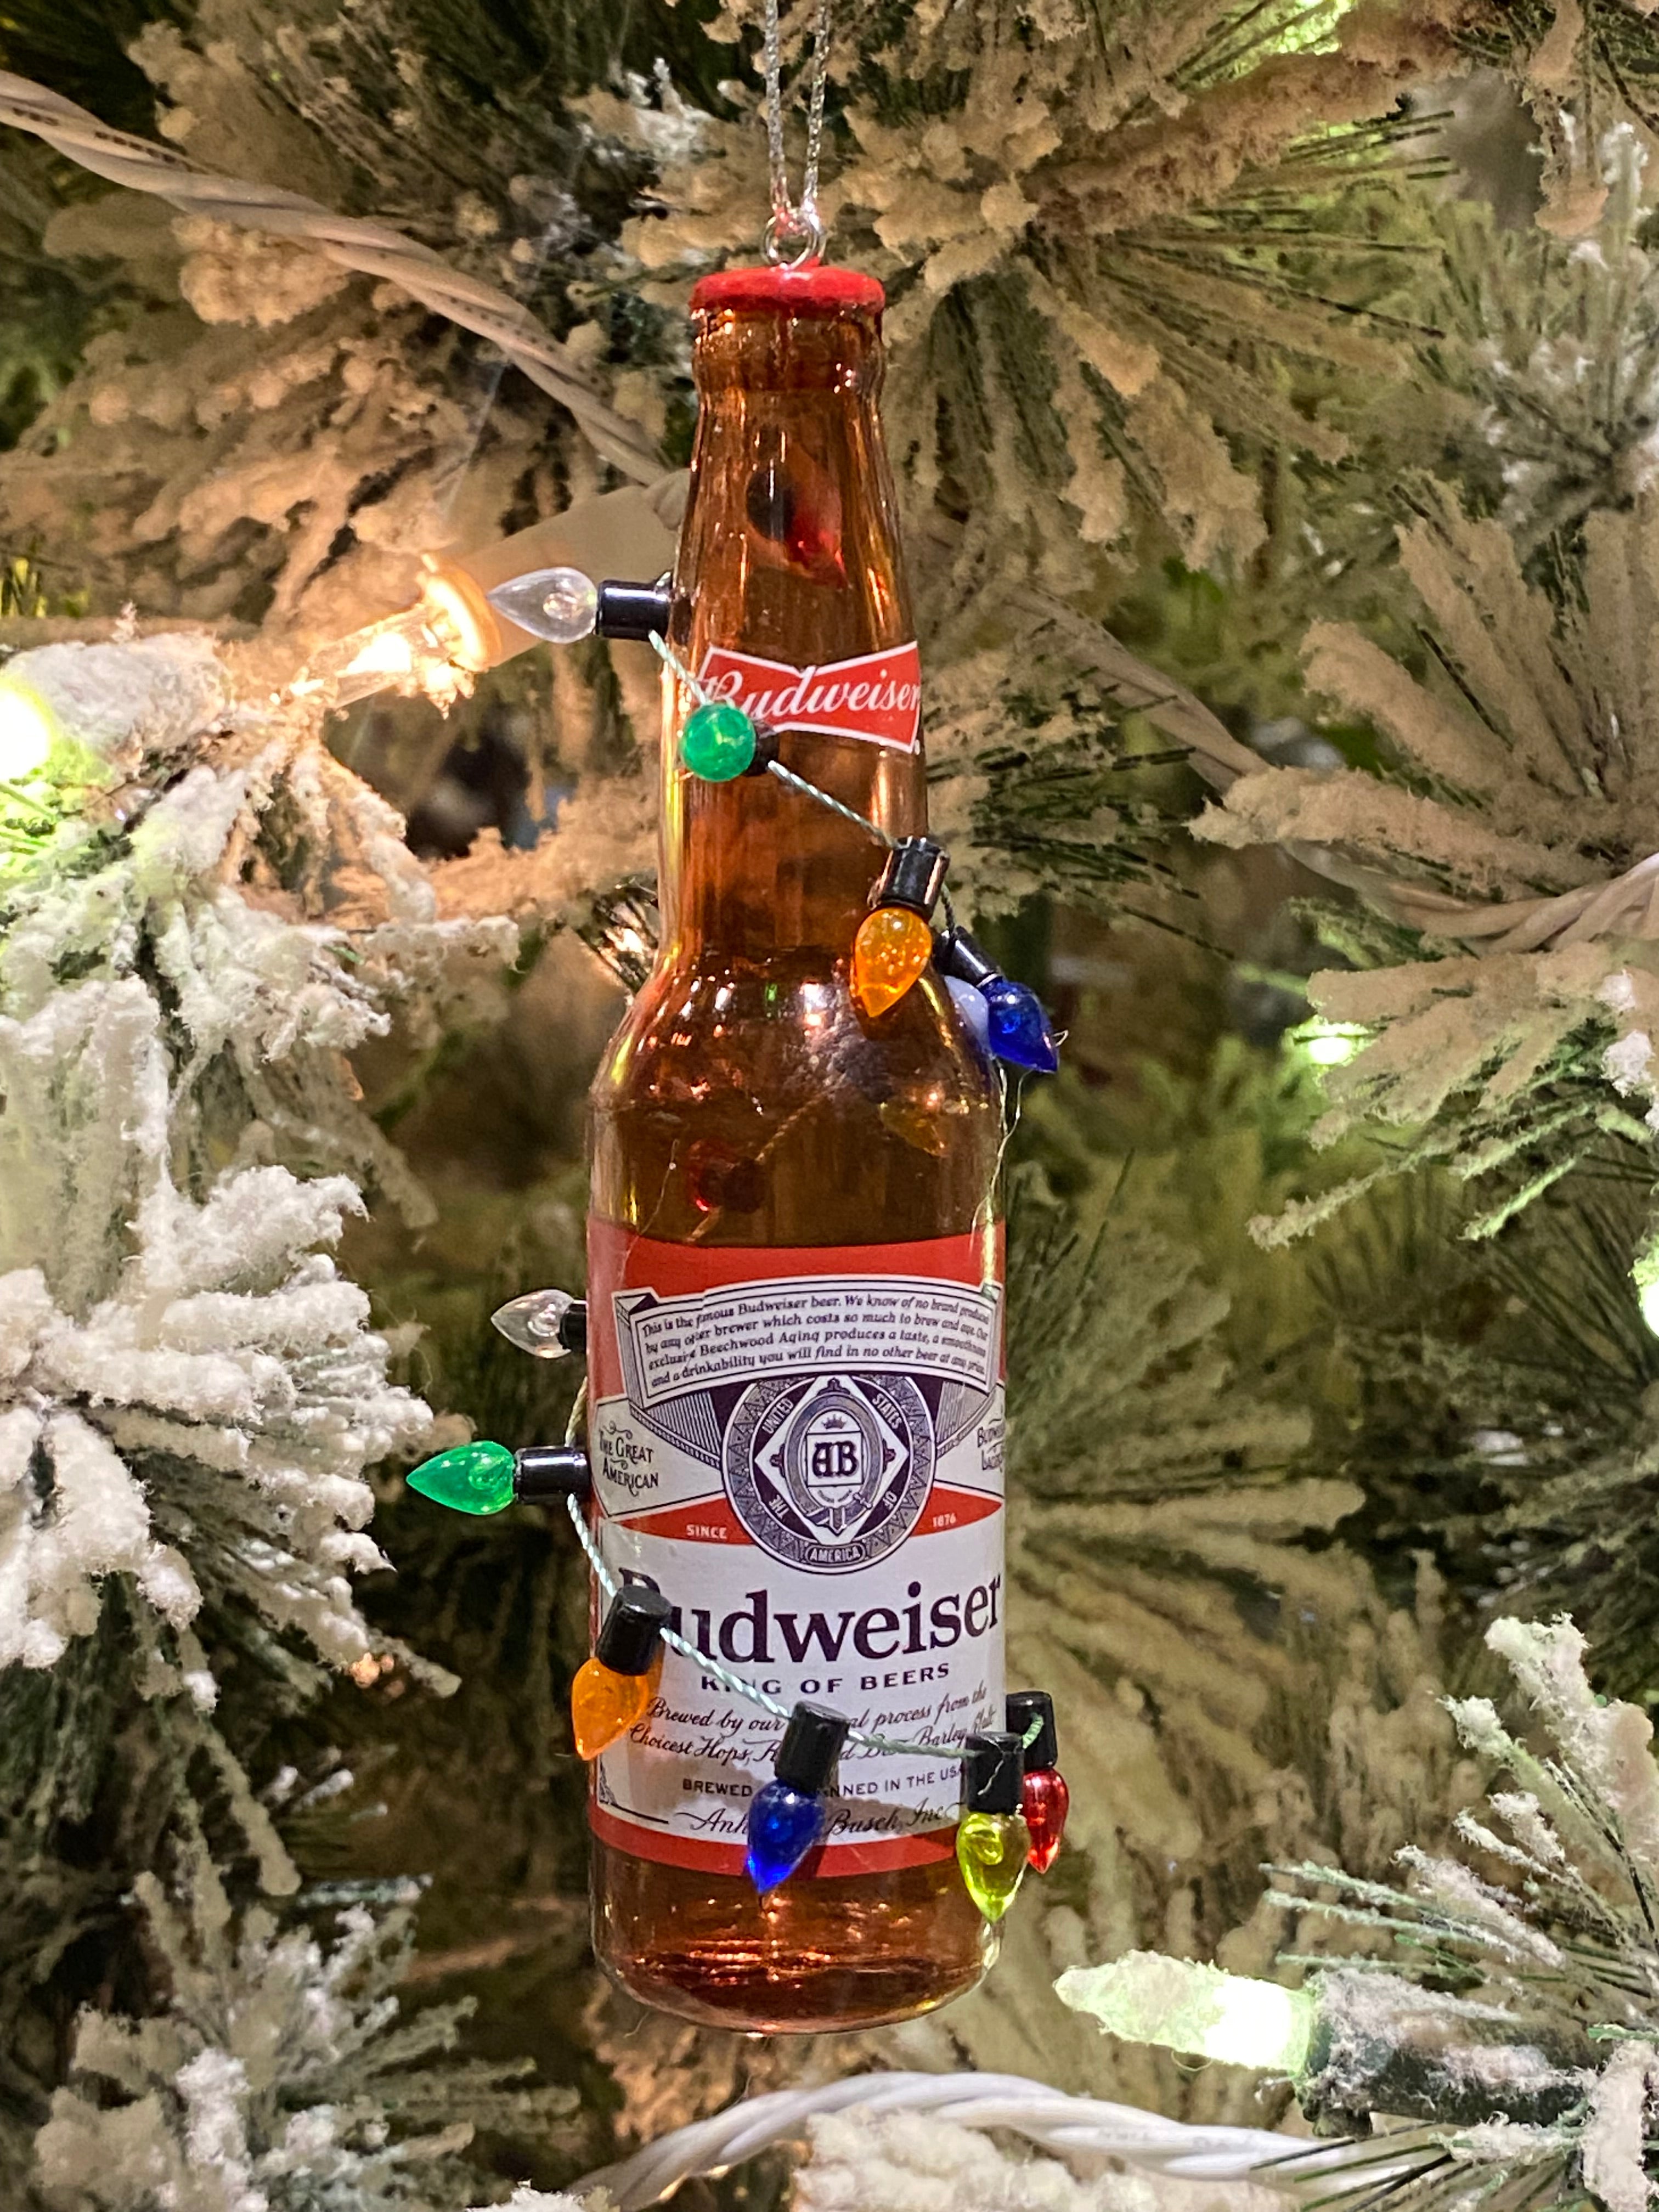 Budweiser Bottle with Bulb Ornaments